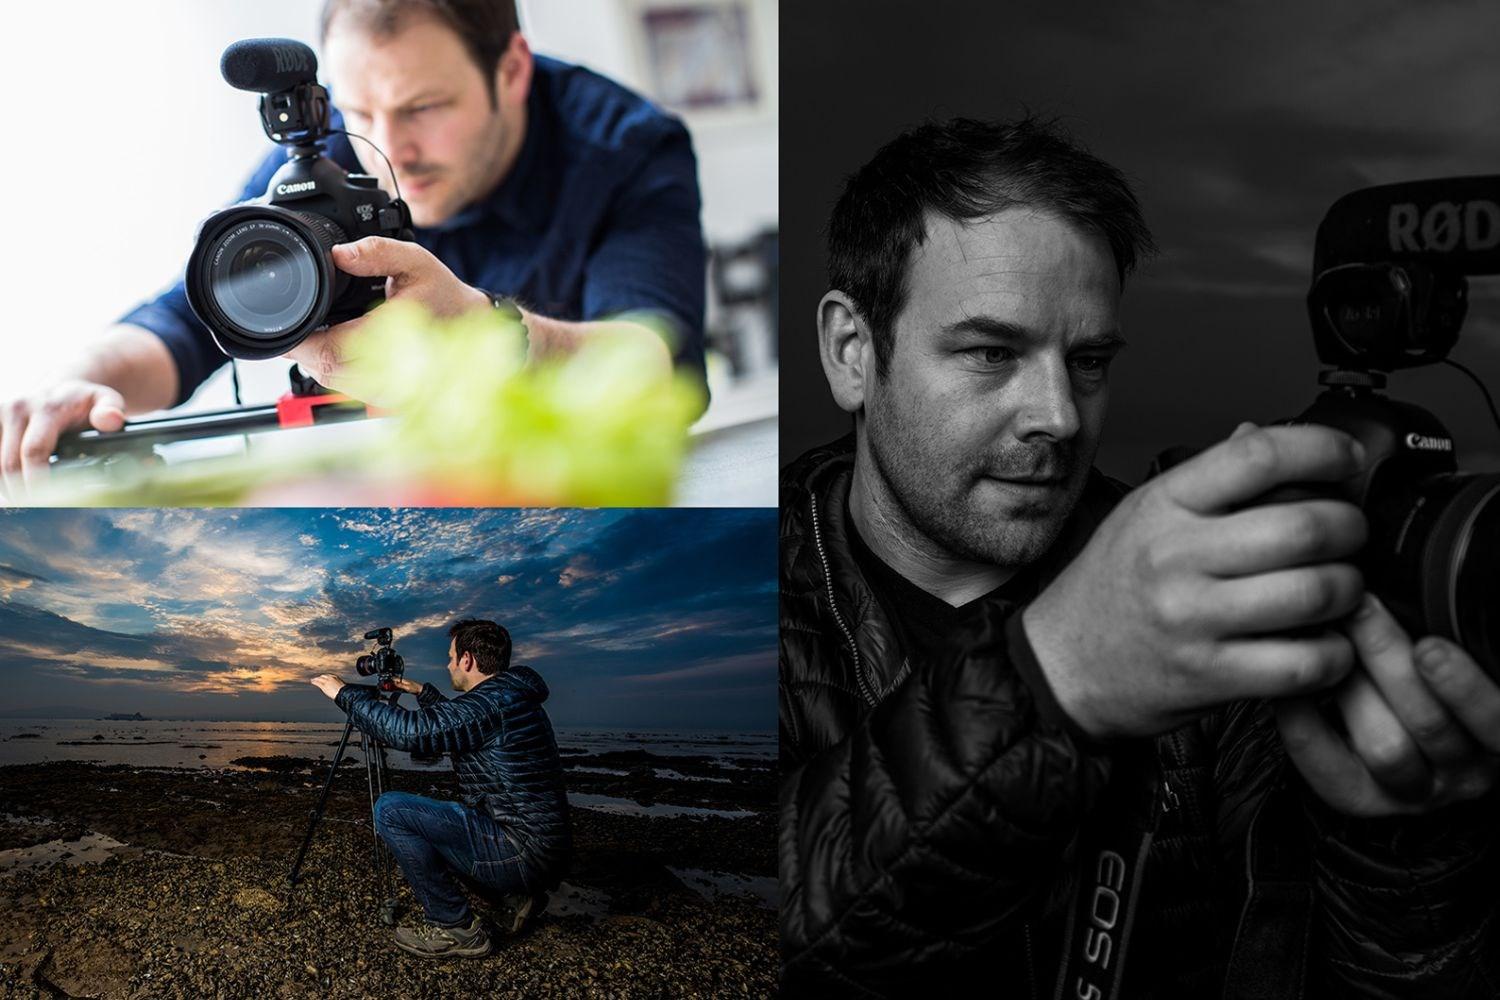 A collage of still images featuring Ben Price taking videos in different circumstances